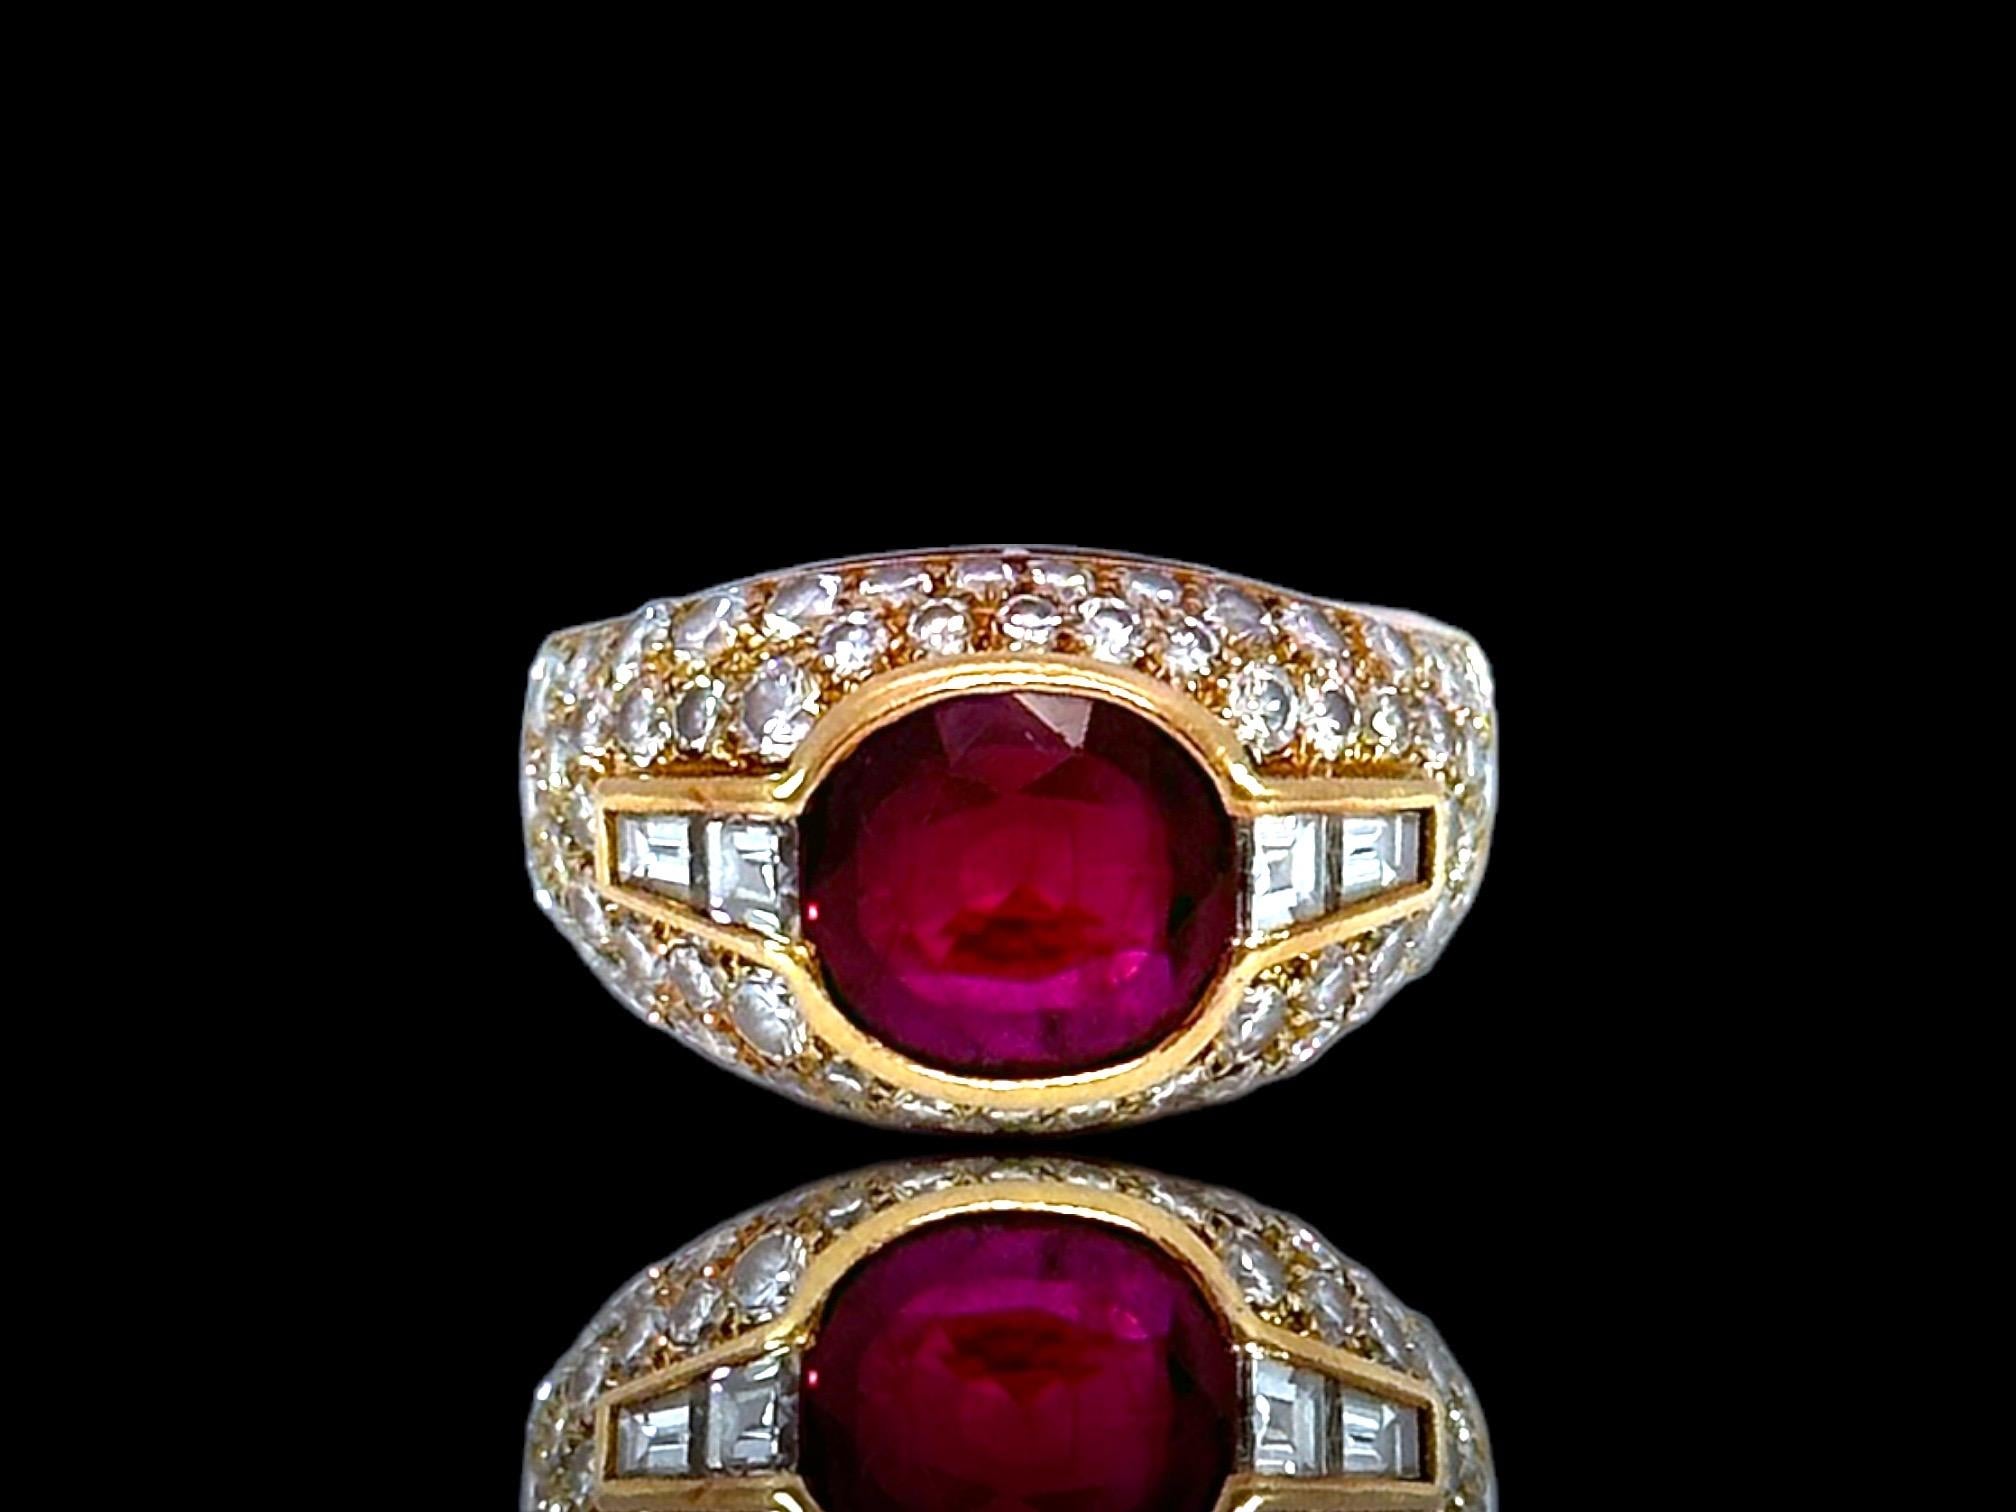 Oval Cut Bvlgari Trombino 18kt Yellow Gold Ring 2.09ct Ruby & Diamonds With GRS Cert For Sale